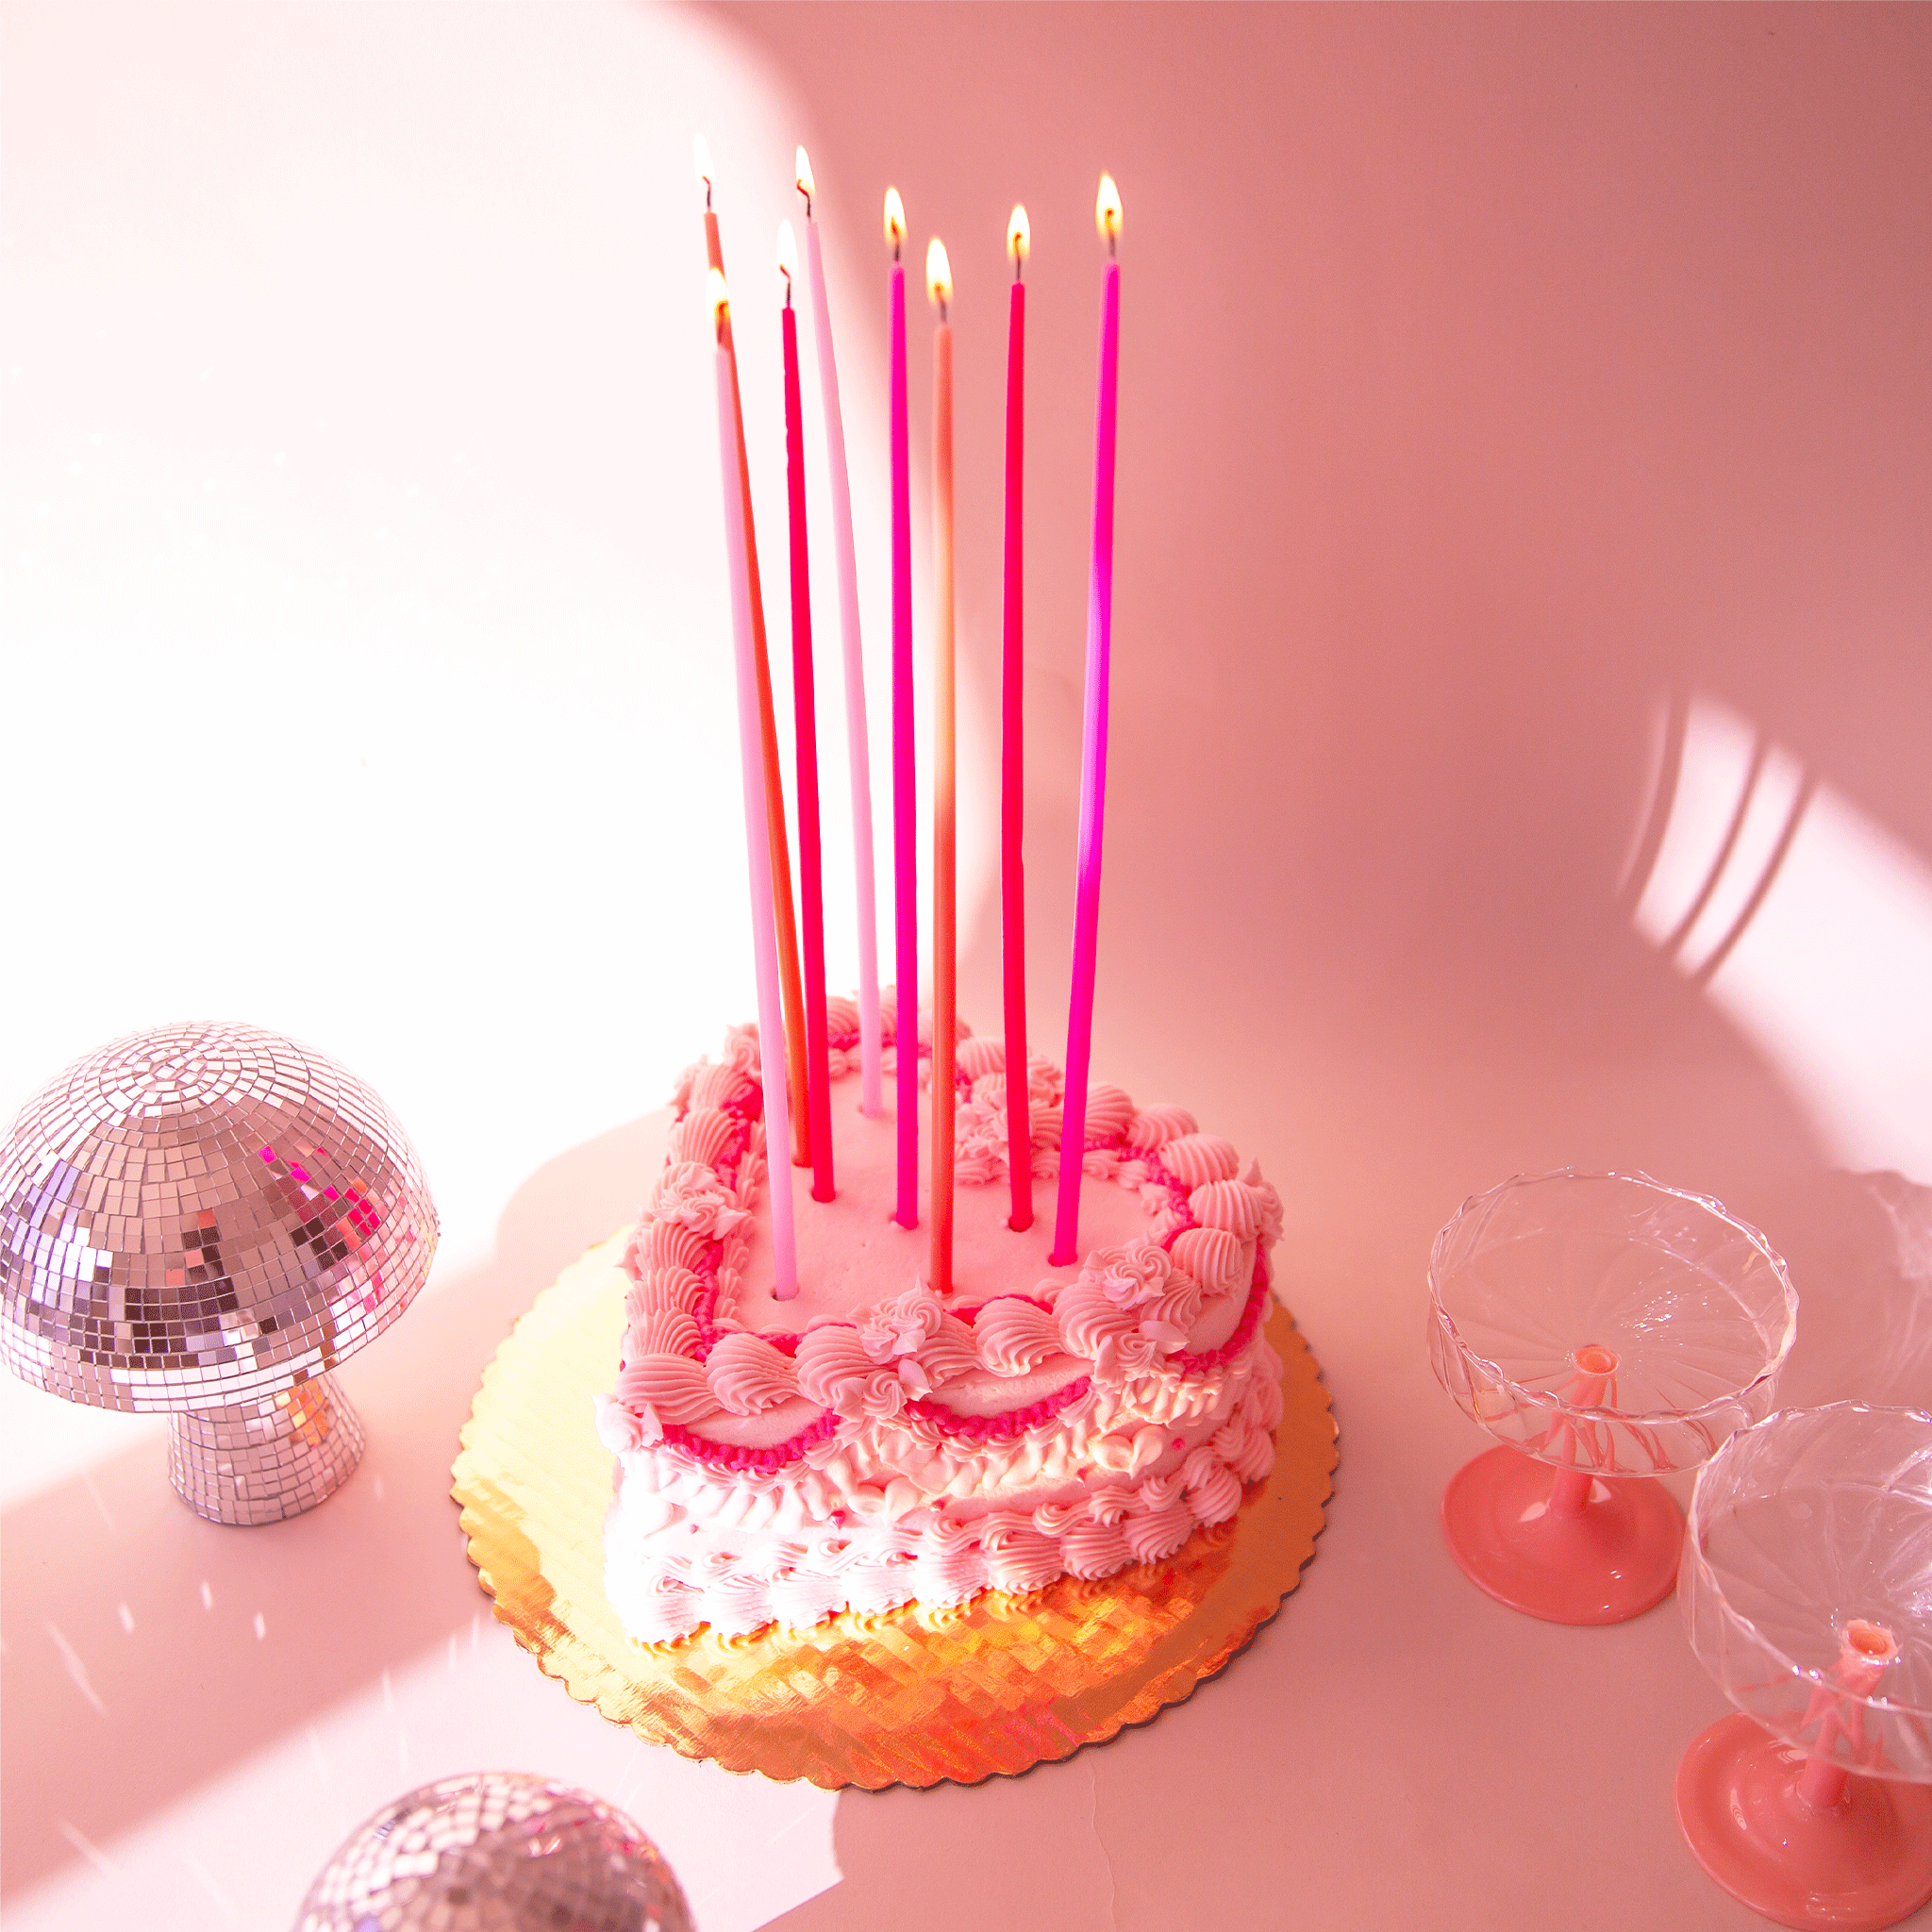 Super tall tapered candles in various shades of pink staged in a birthday cake.